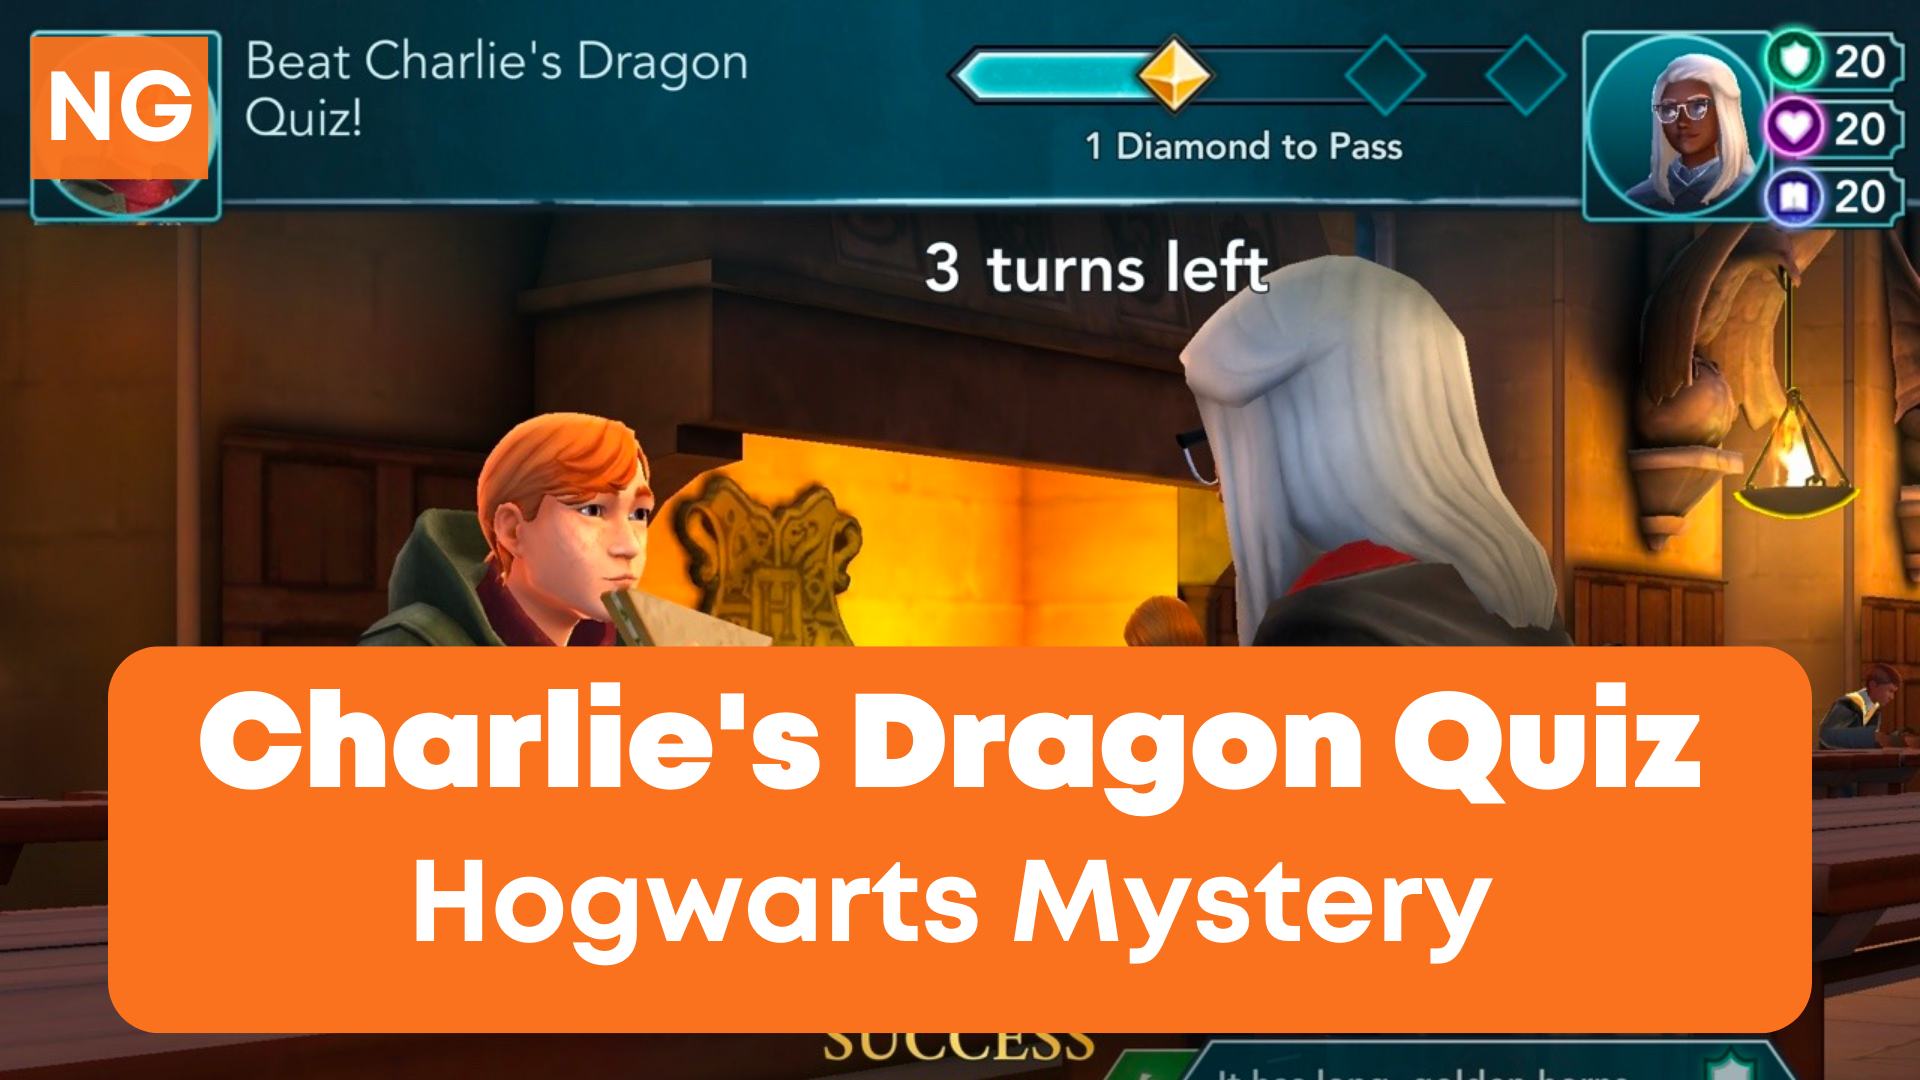 How to Beat Charlie's Dragon Quiz in Hogwarts Mystery